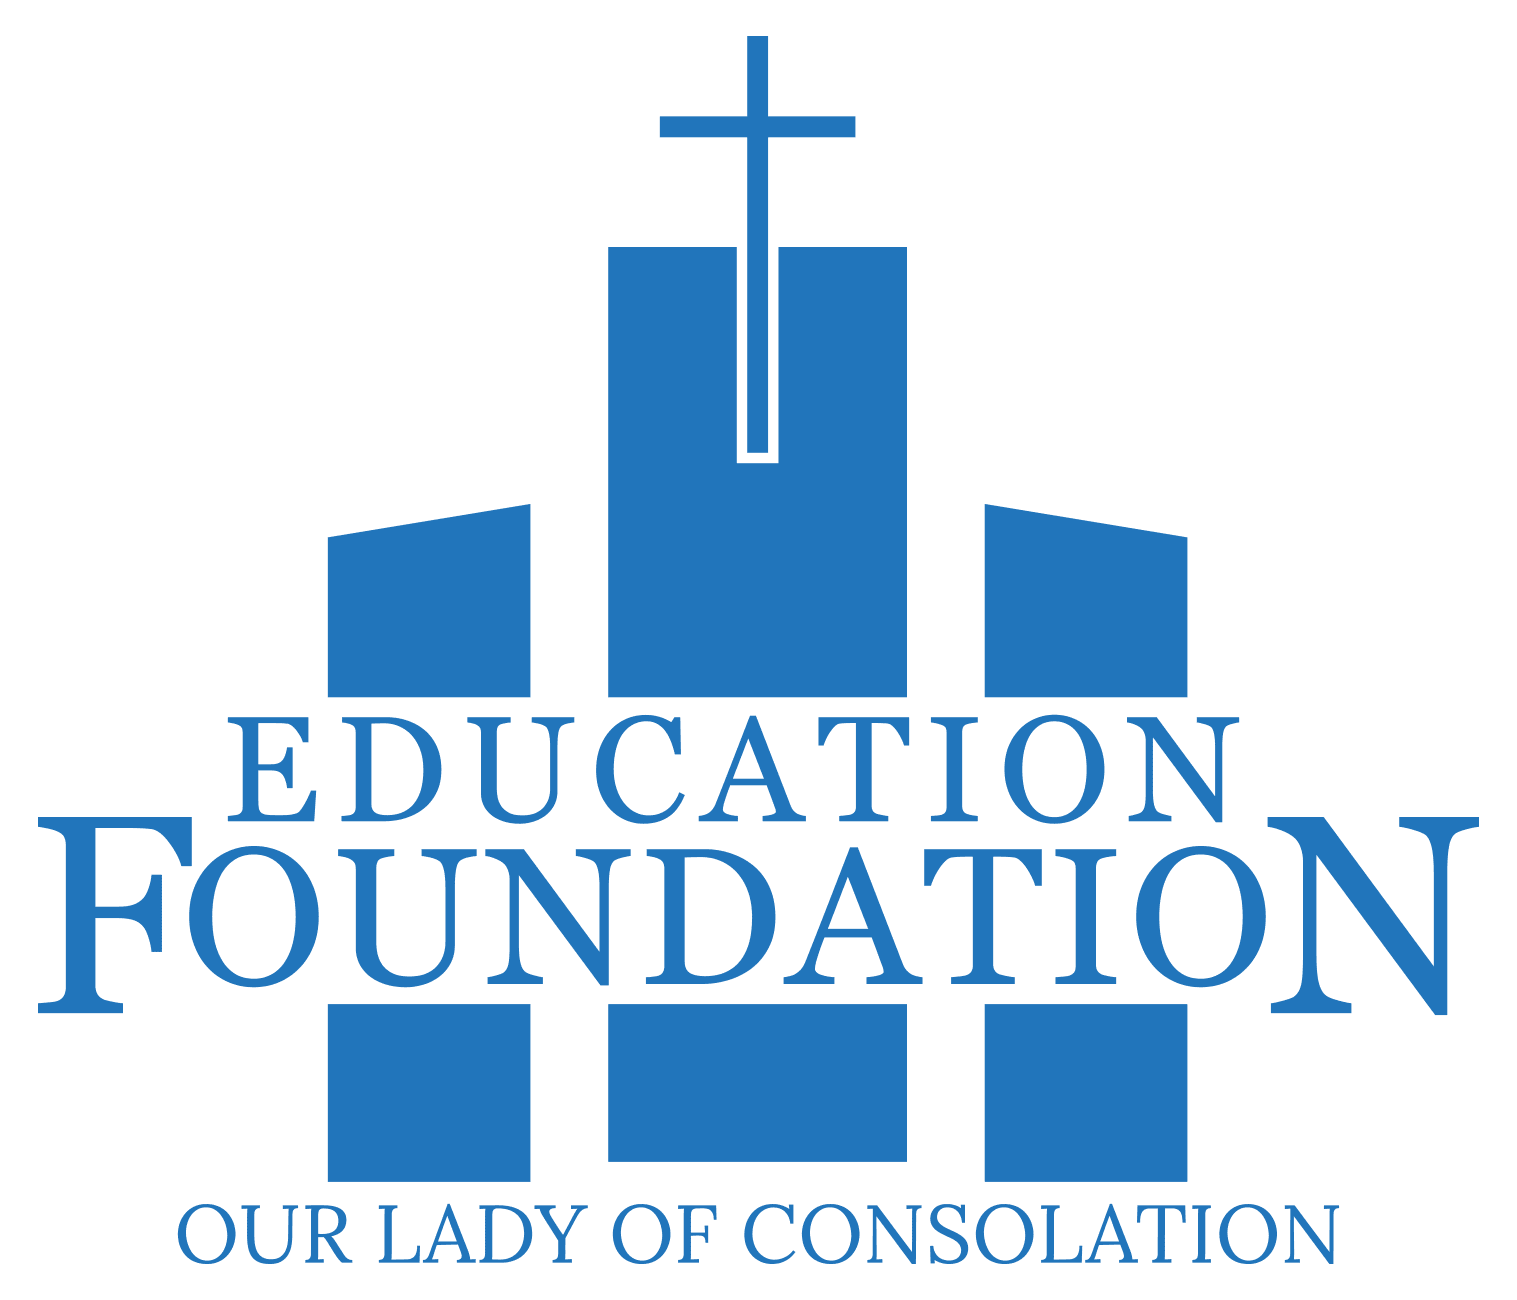 Our Lady of Consolation Education Foundation Board